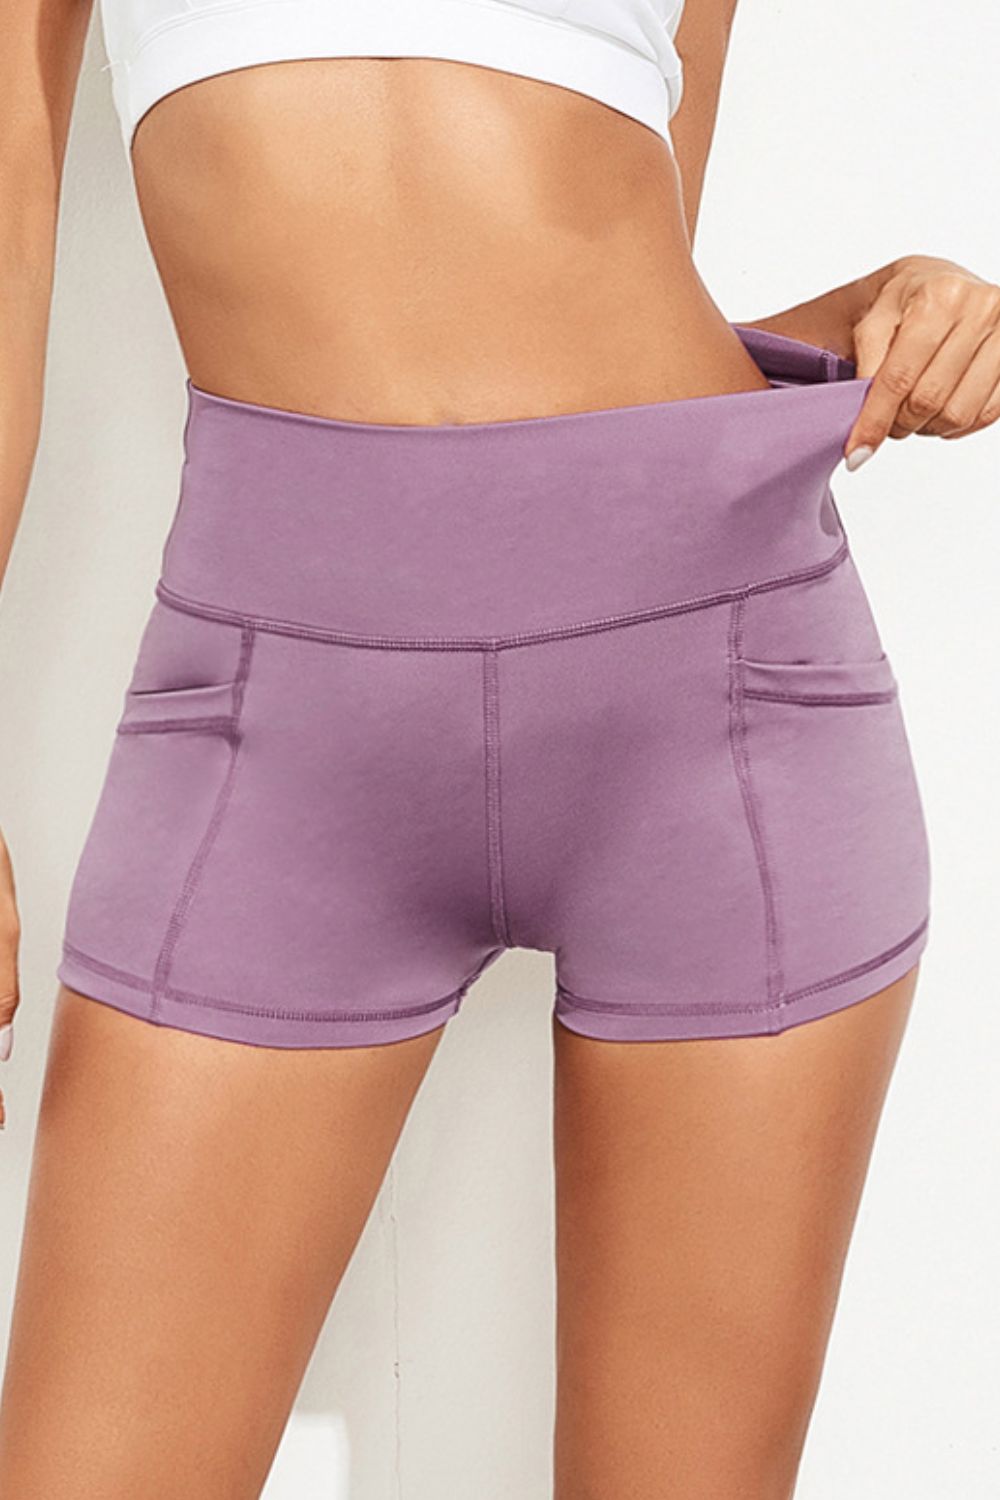 Exposed Seam High Waist Yoga Shorts by GoBliss